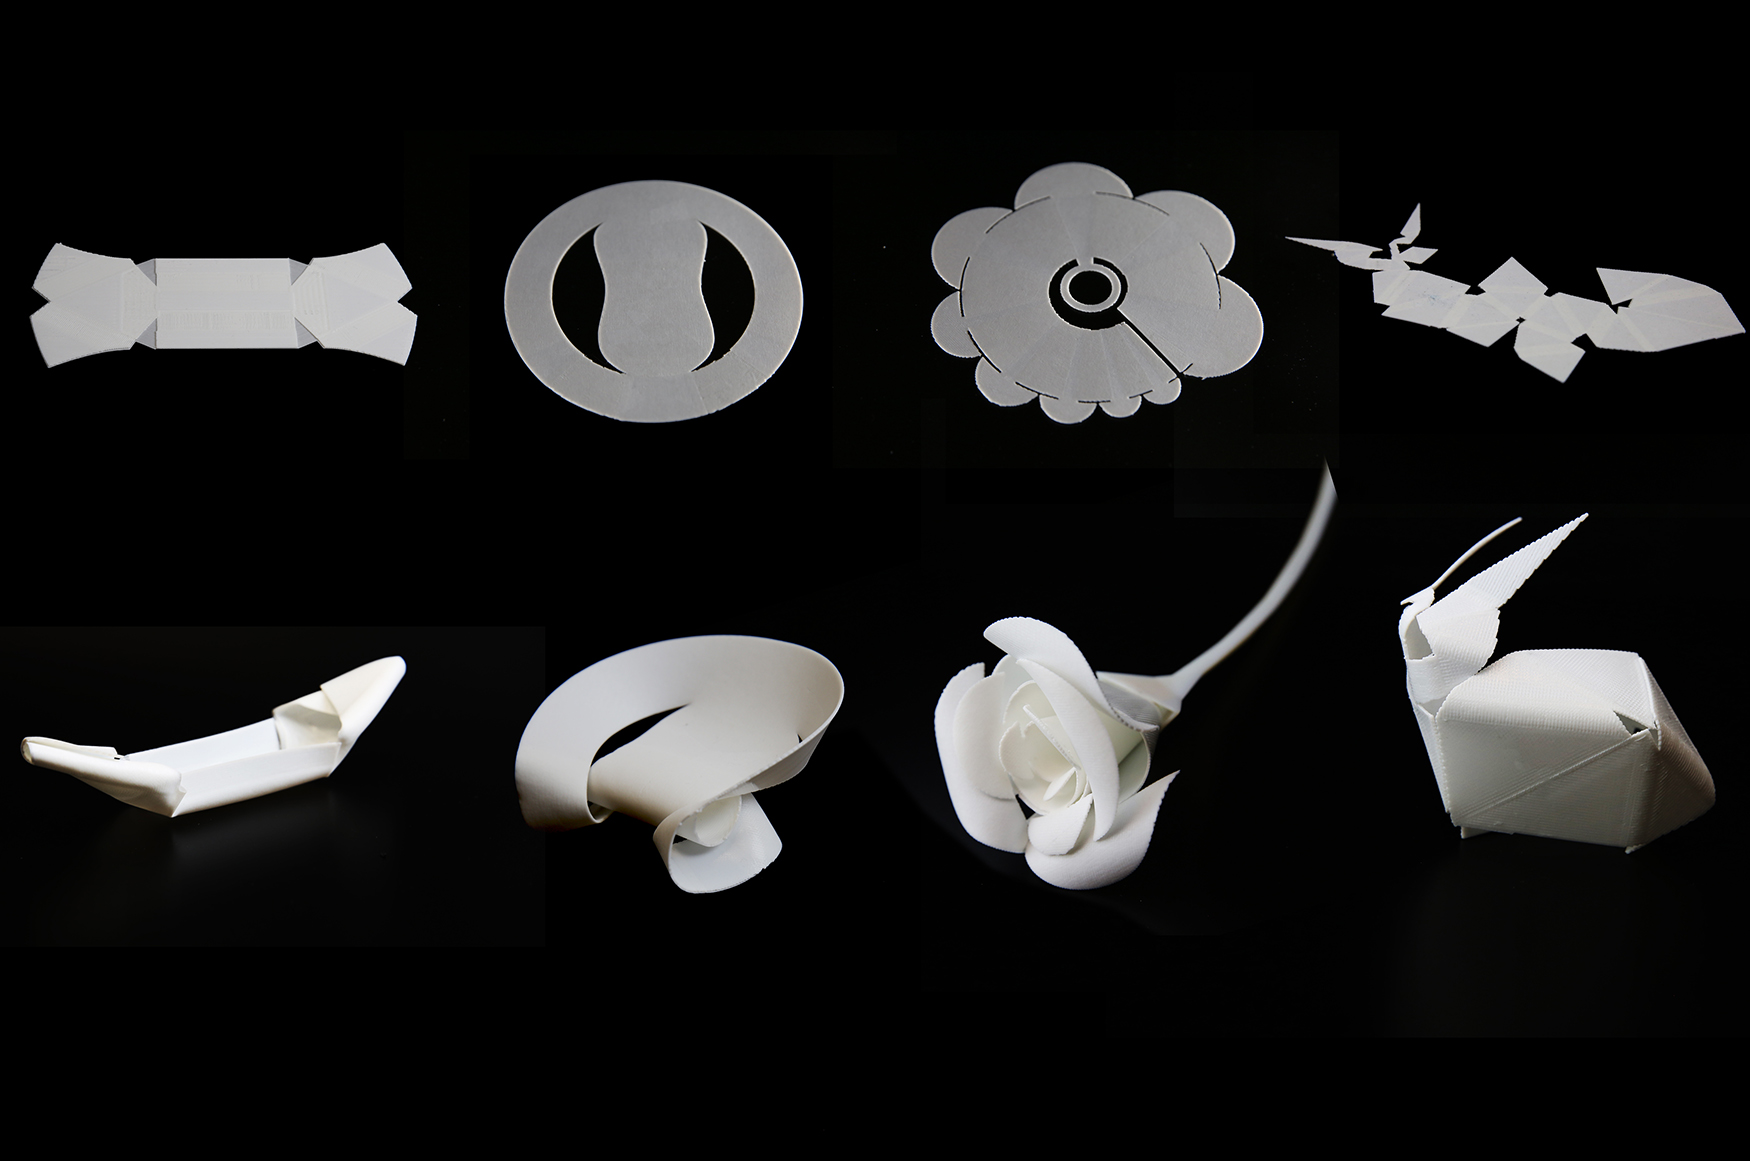 Programmable and 4D printed self-folding: boat, chair, rose, bunny